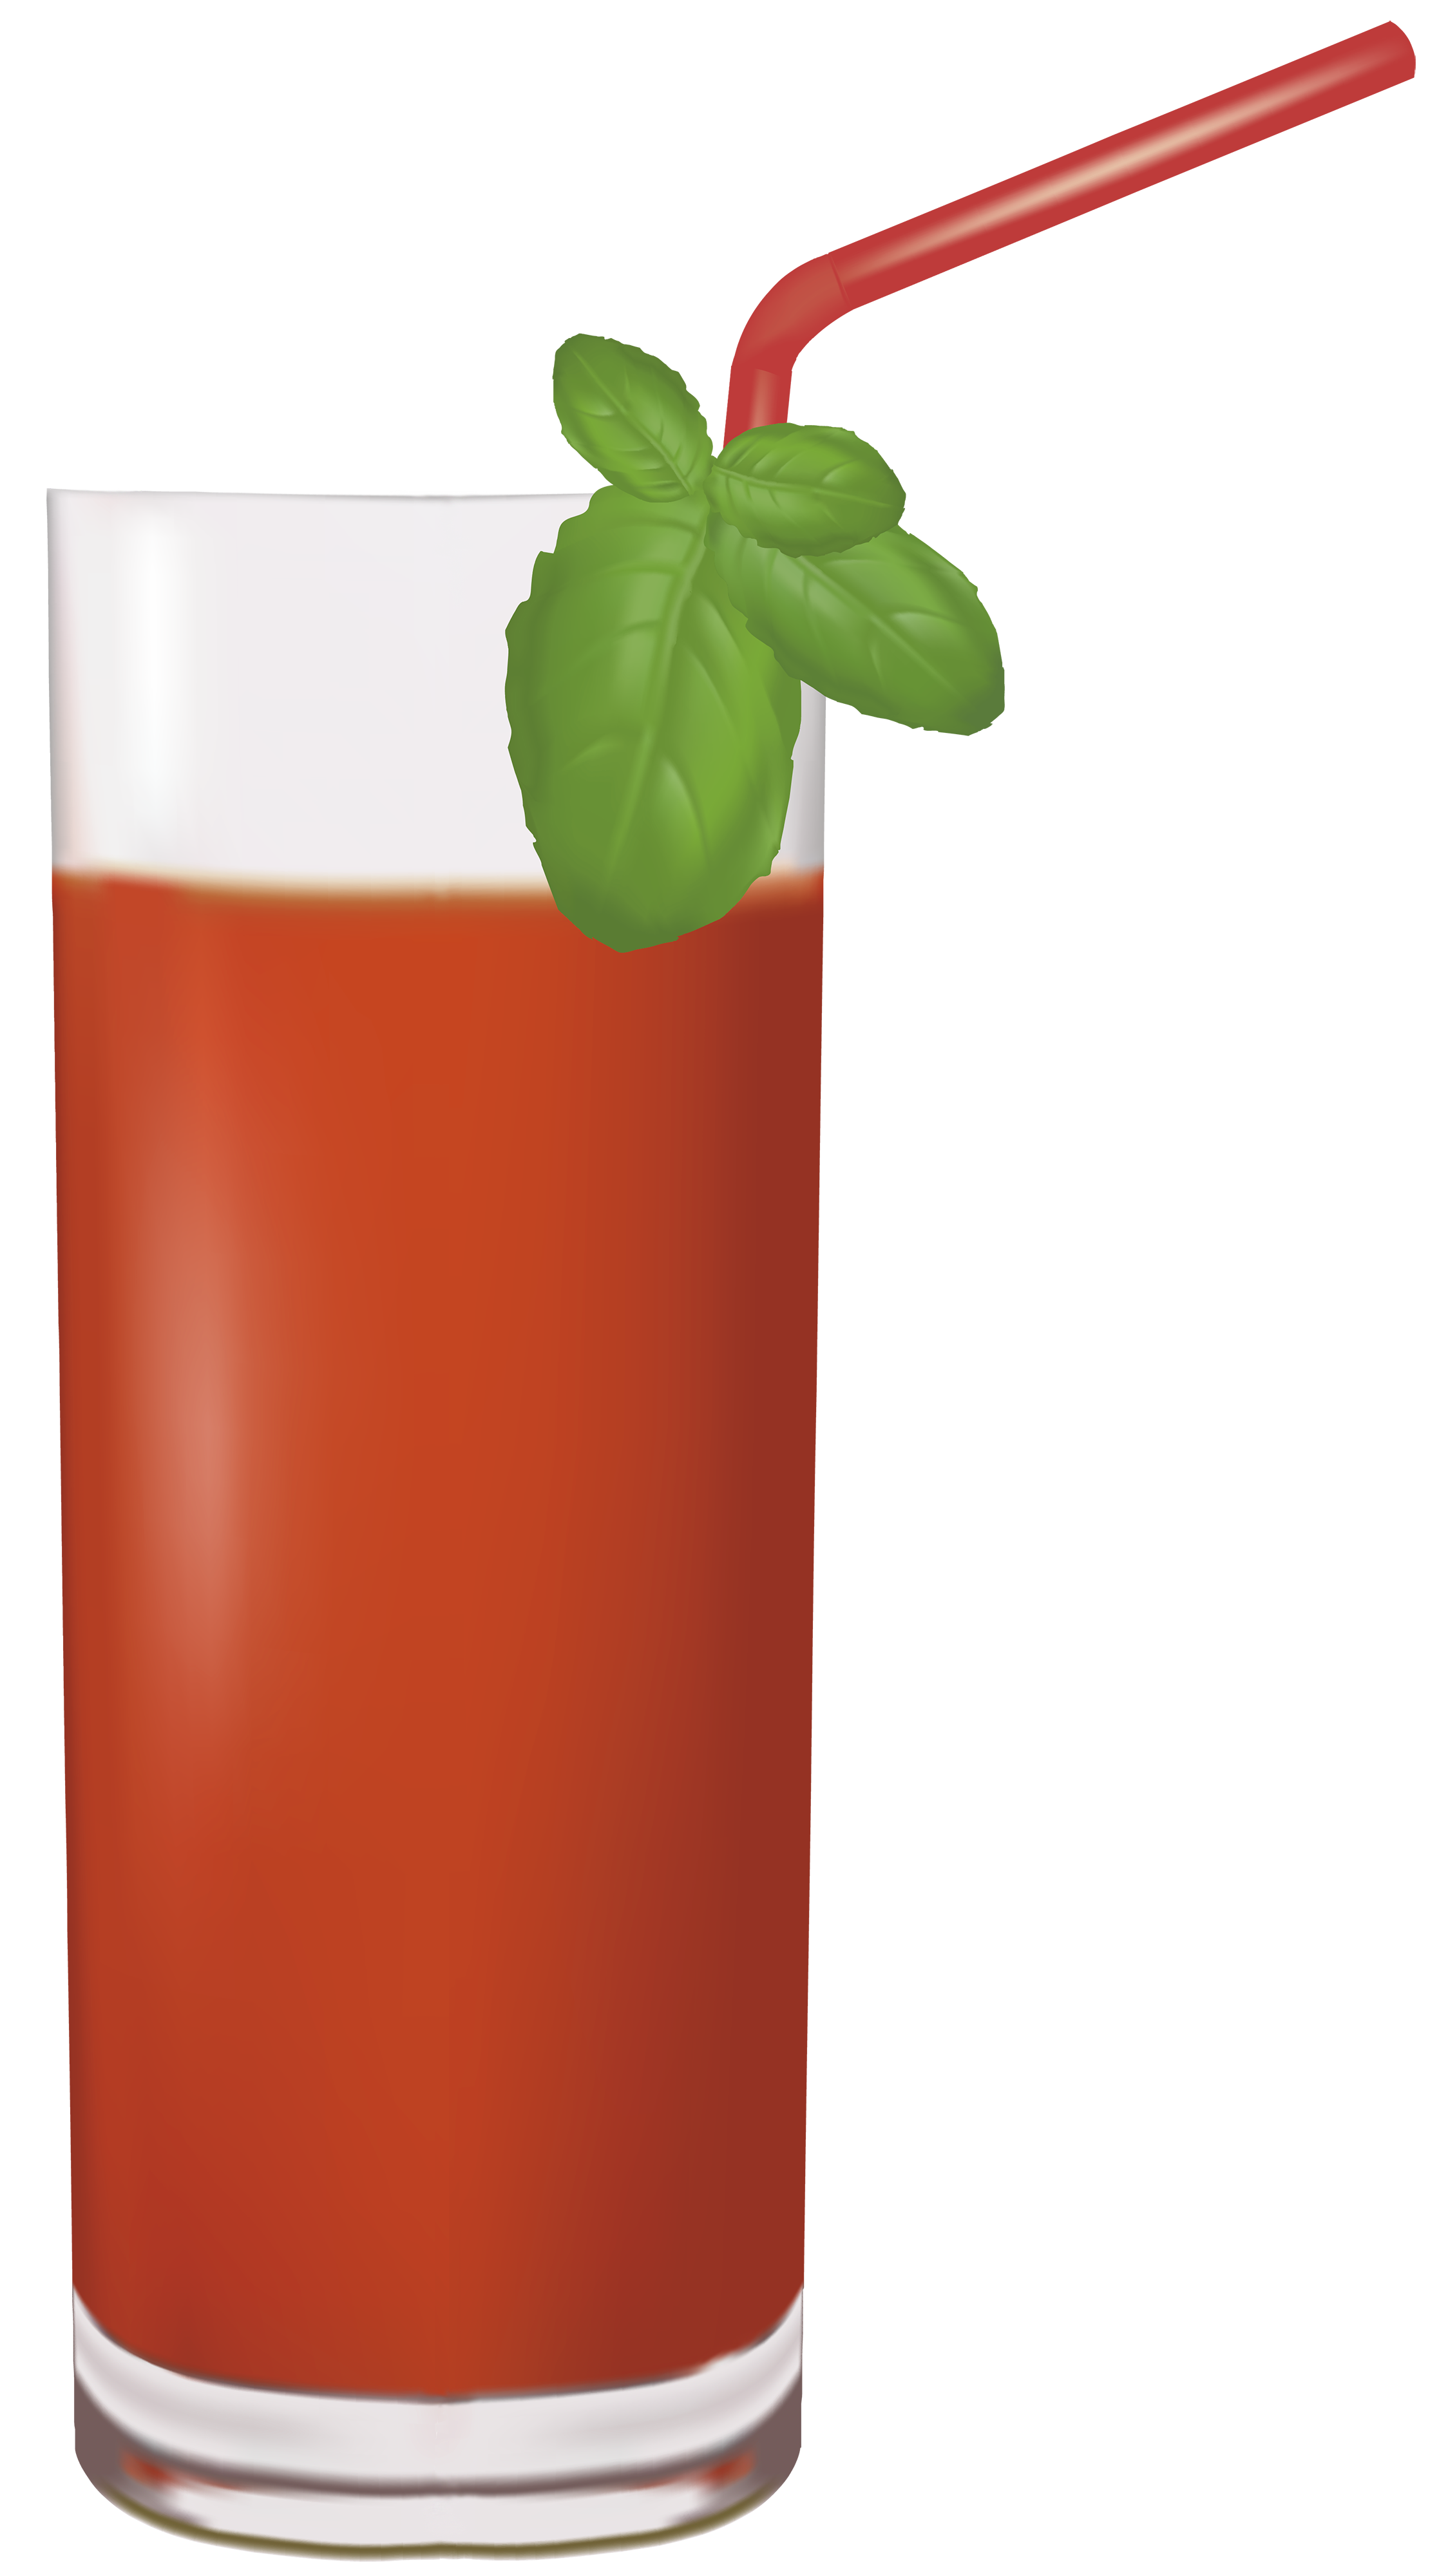 bloody mary drink clipart - photo #5